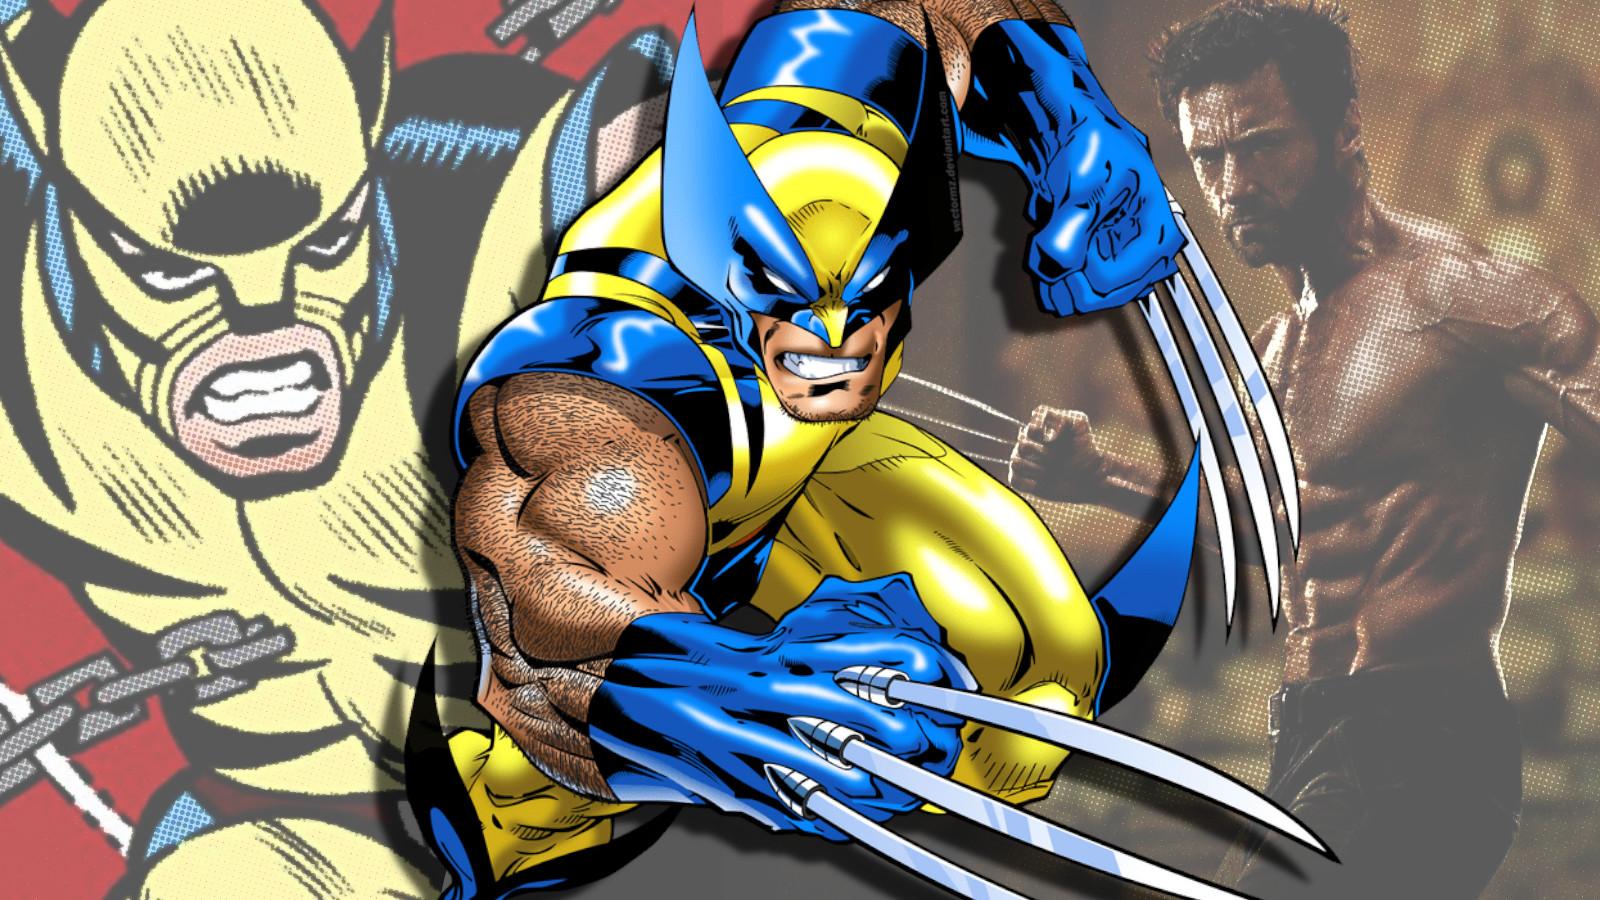 Wolverine throughout the years